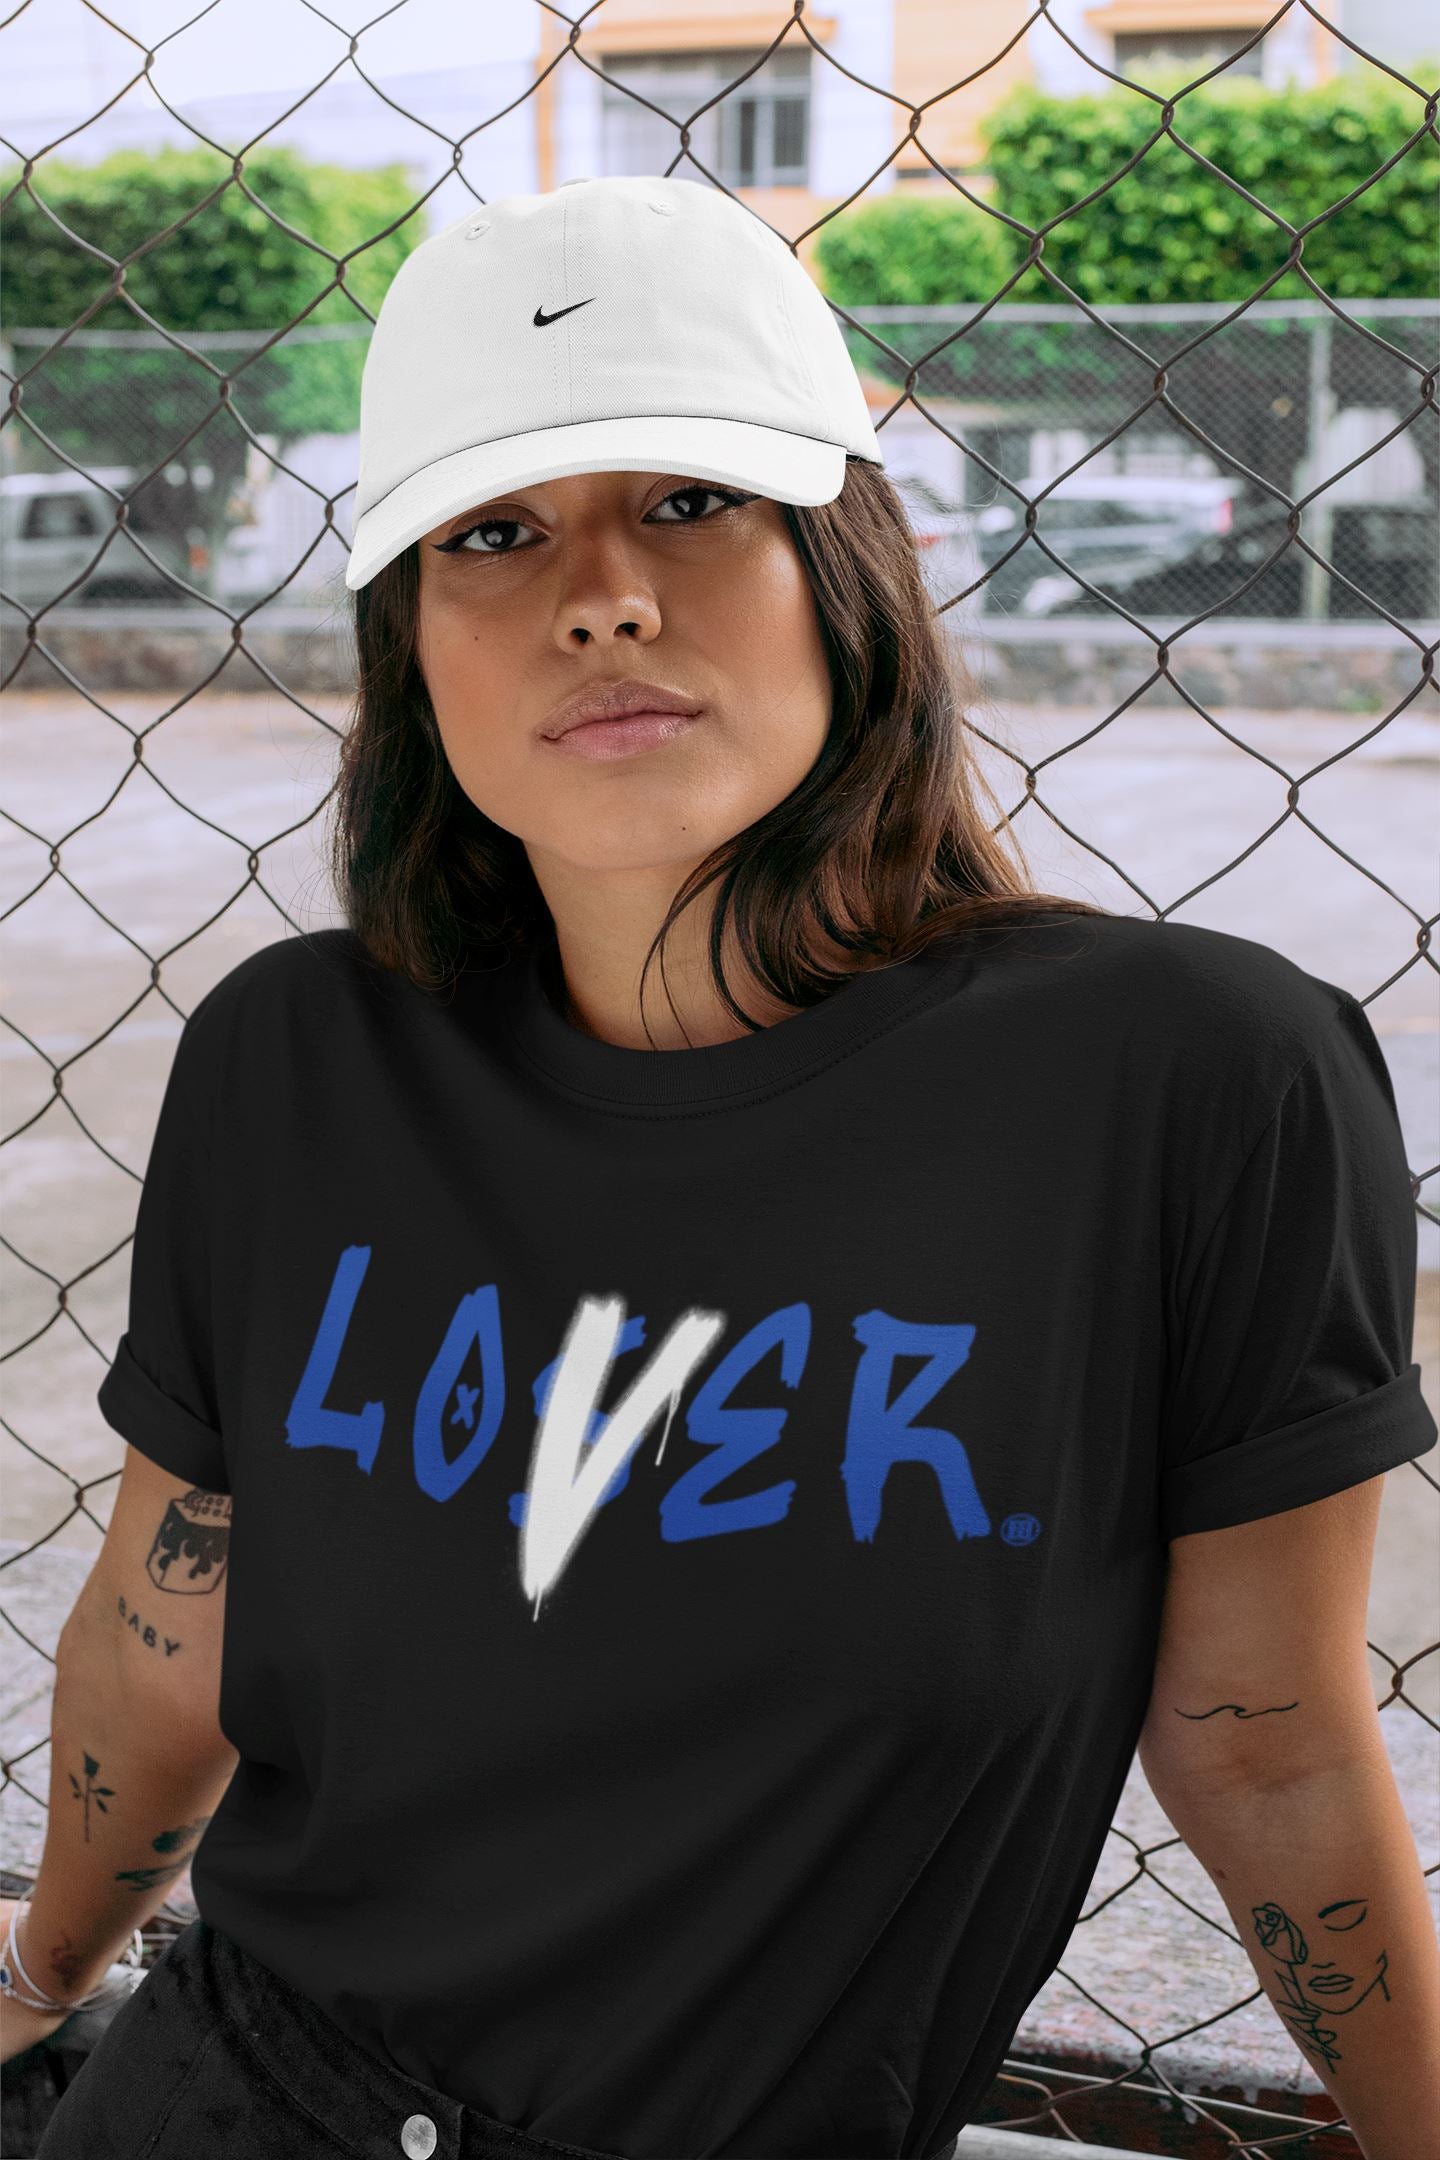 Yeezy 350 Dazzling Blue Sneaker Match Tees Loser Lover Sneaker Tees Yeezy 350 Dazzling Blue Sneaker Release Tees Unisex Shirts